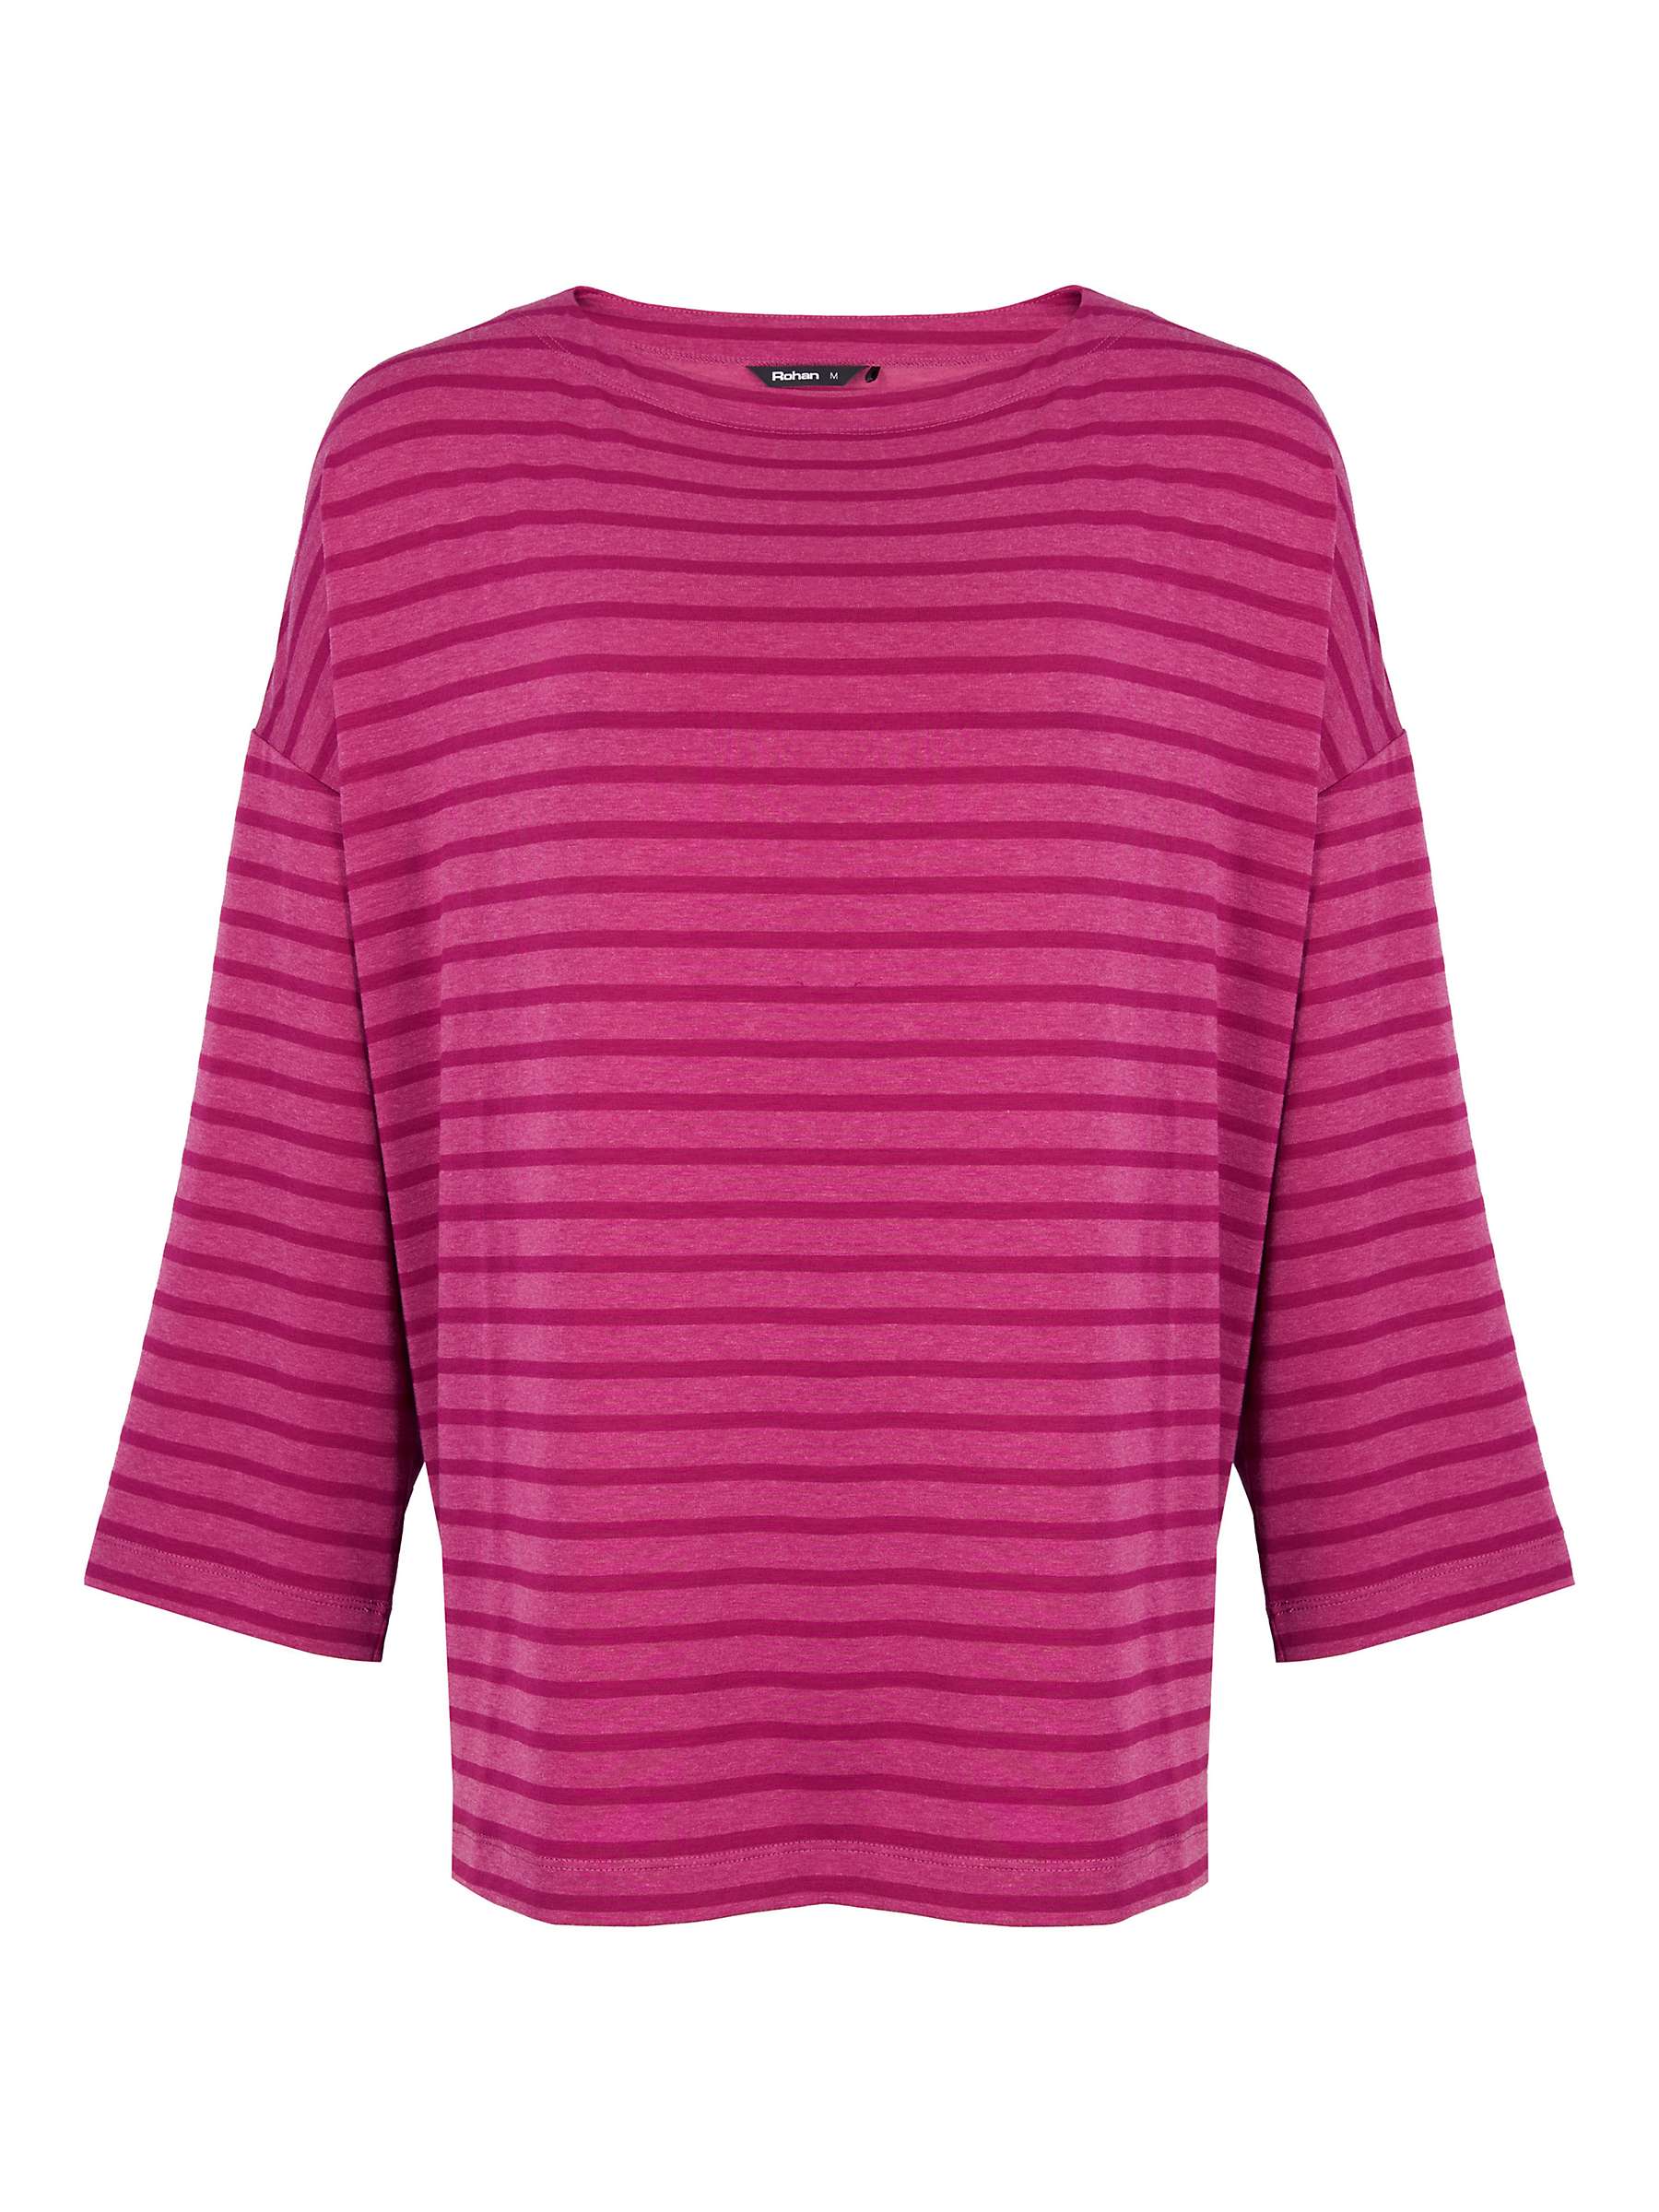 Buy Rohan Harbour Striped Top Online at johnlewis.com